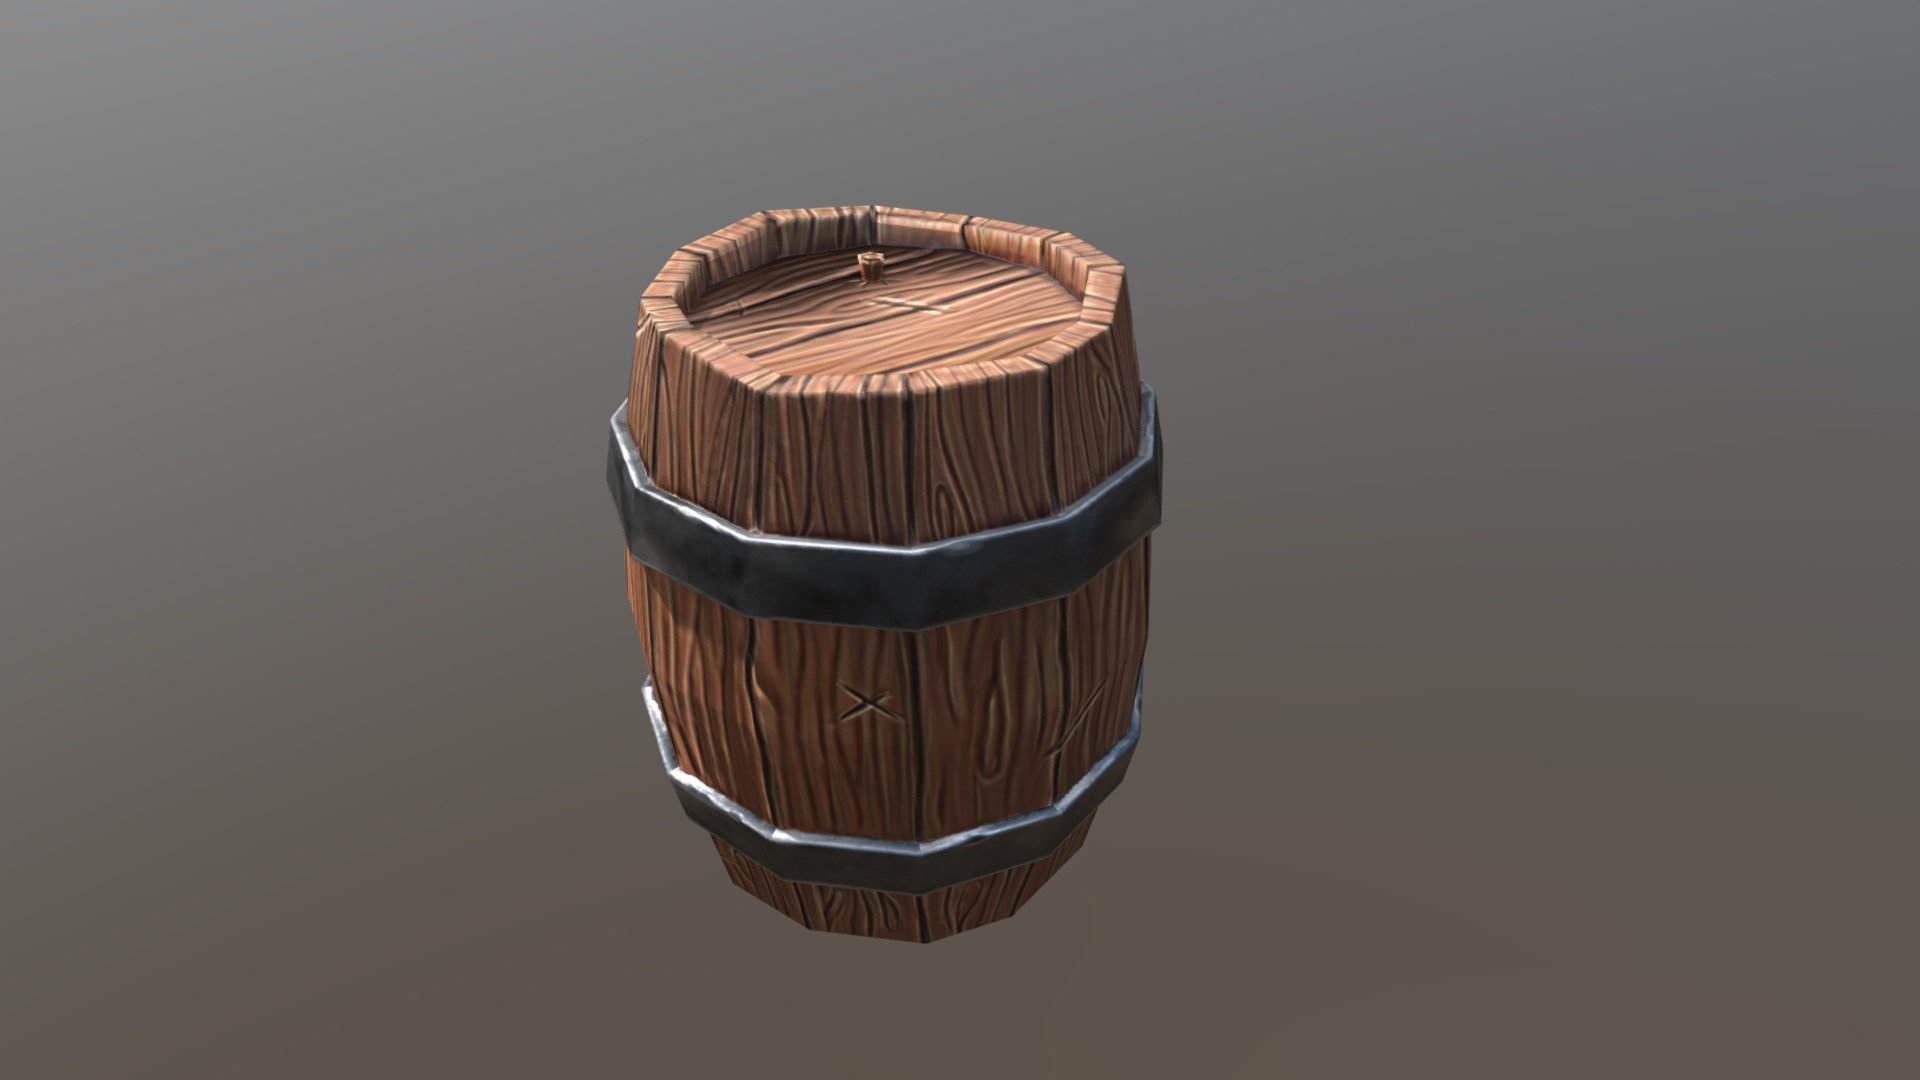 I made this stylized Barrel for a youtube tutorial. The model includes a baked normal texture, and roughness, specular and diffuse map handpainted 3d model